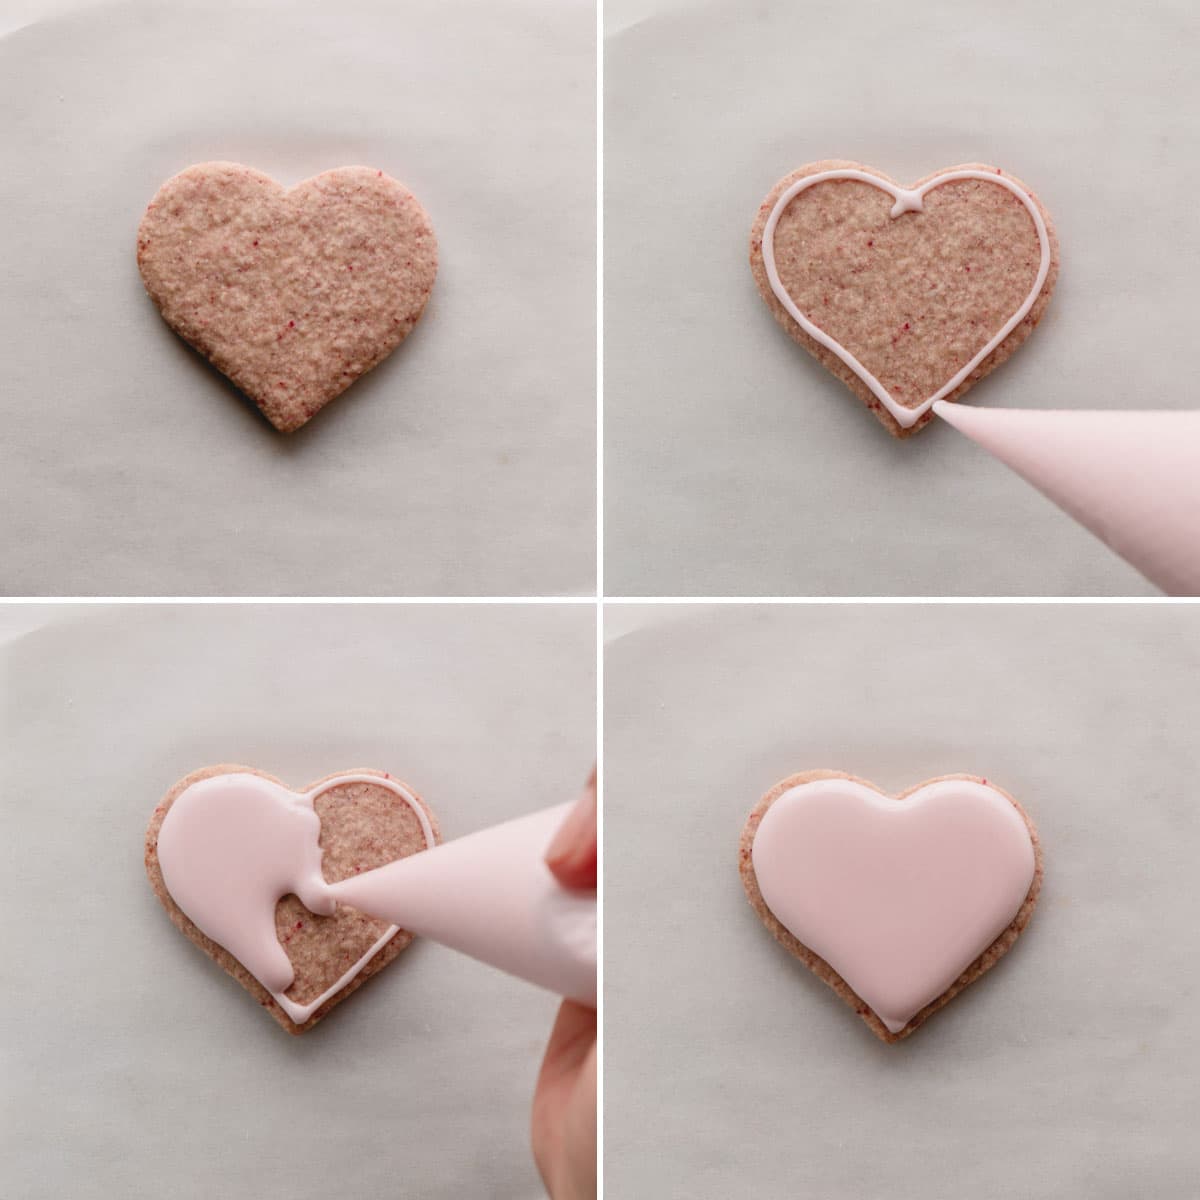 The process of lining and flooding a heart-shaped raspberry sugar cookie with pink royal icing.